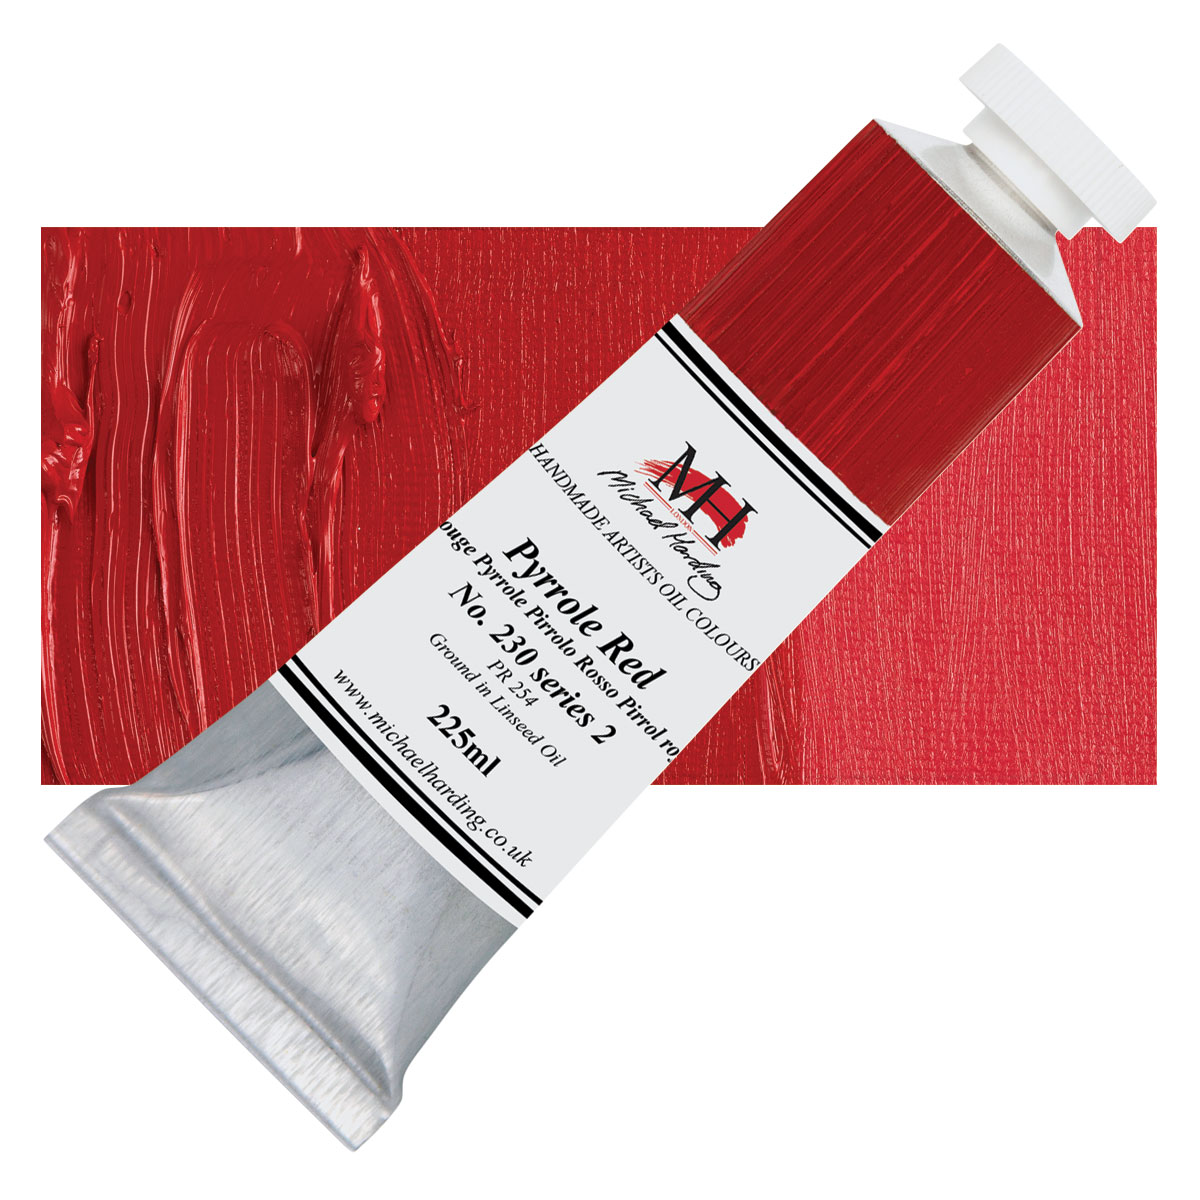 Michael Harding Artists Oil Color - Pyrrole Red, 225 ml, Tube